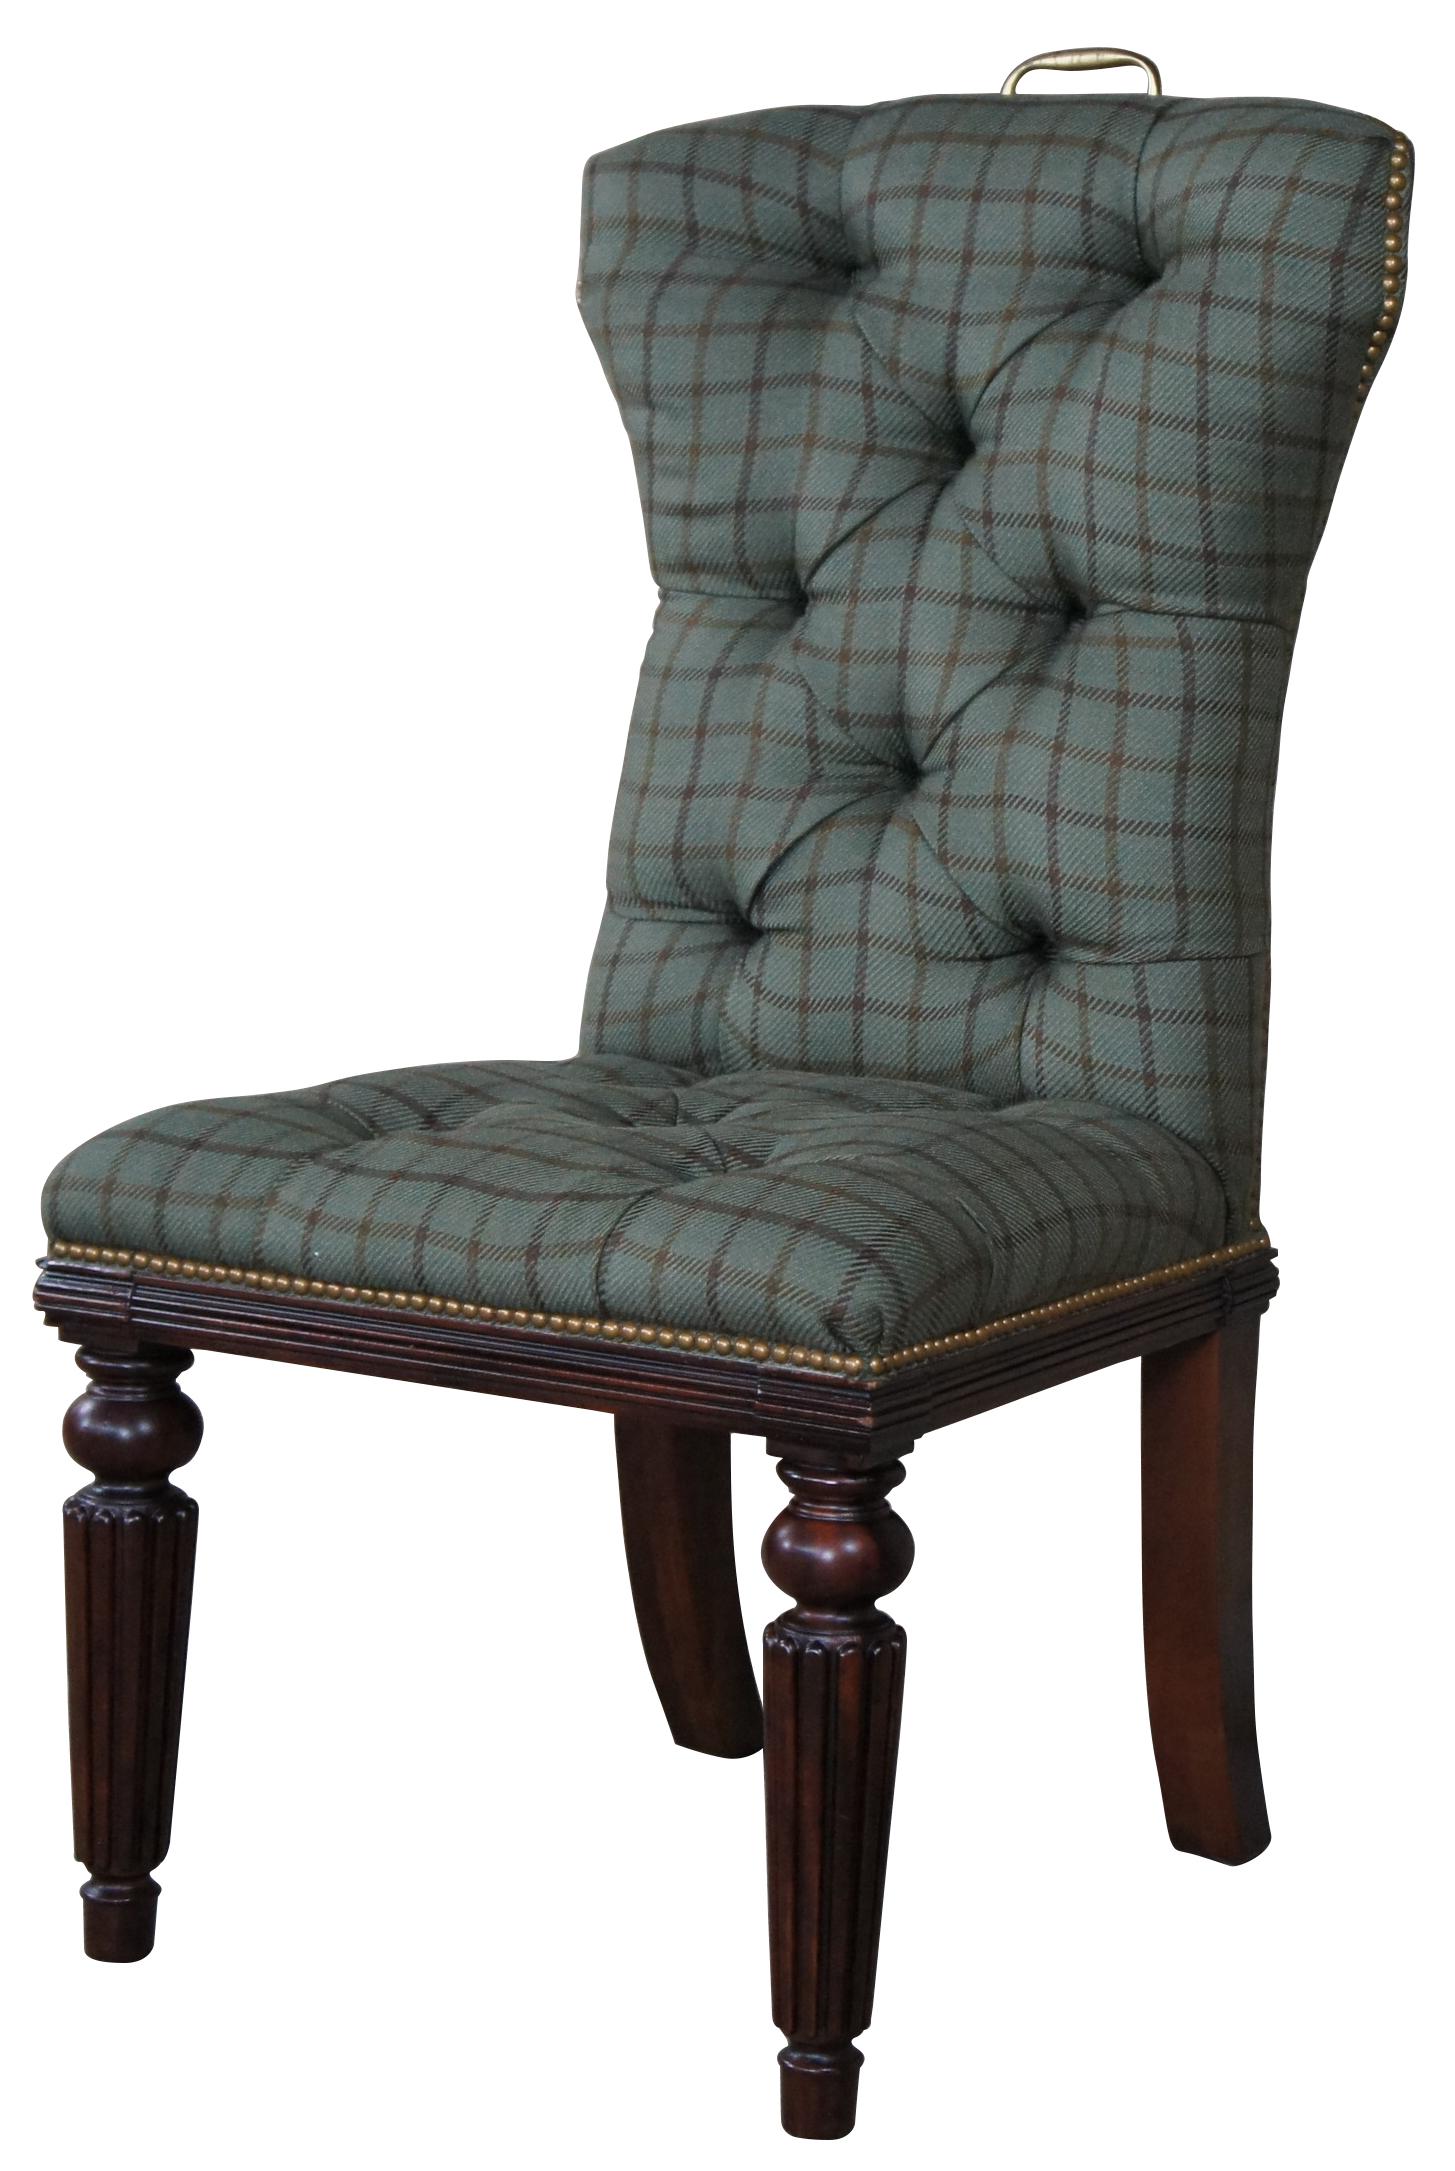 Traditional Ralph Lauren chair. Features shaped tall backs, tufted green plaid wool upholstery with nail head trim and brass handle along the back. Supported by turned mahogany reeded legs with real splay legs.
 